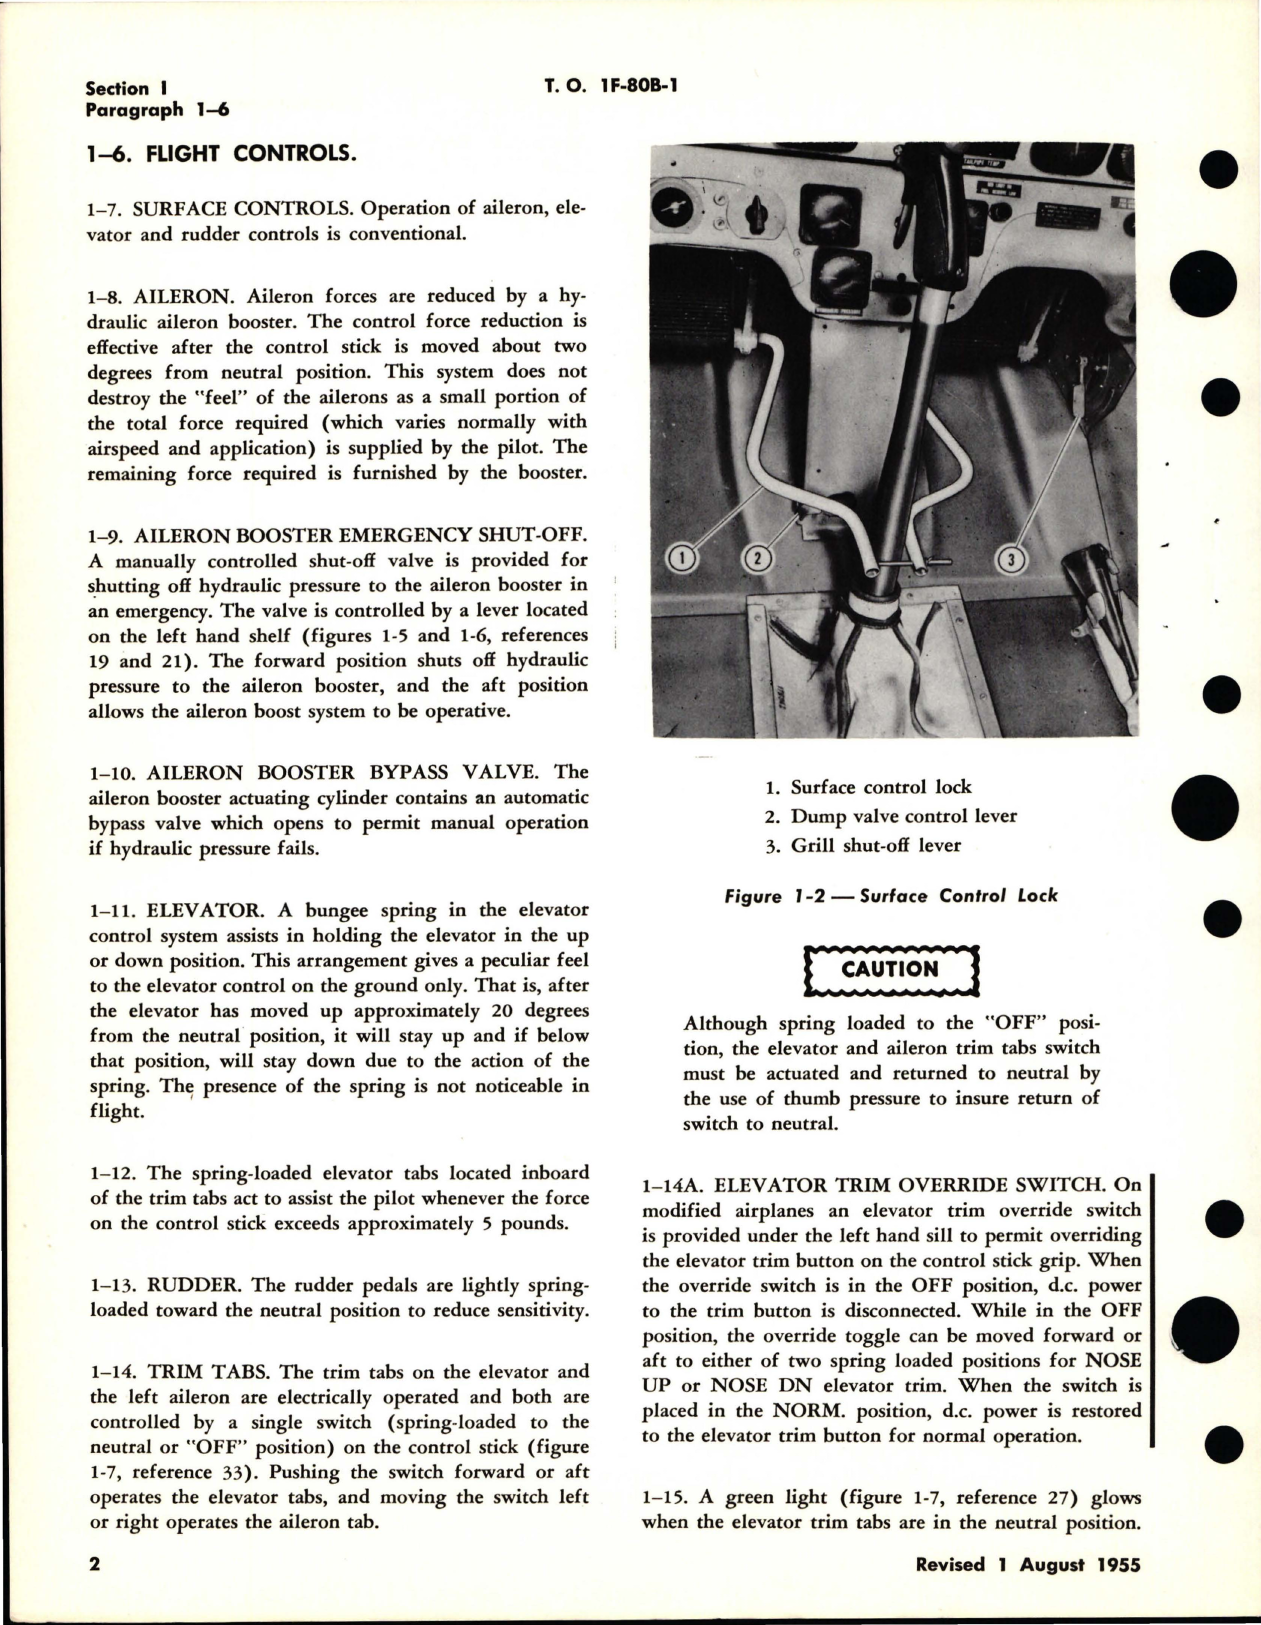 Sample page 8 from AirCorps Library document: Flight Operating Instructions for F-80B, F-80C, and TV-1